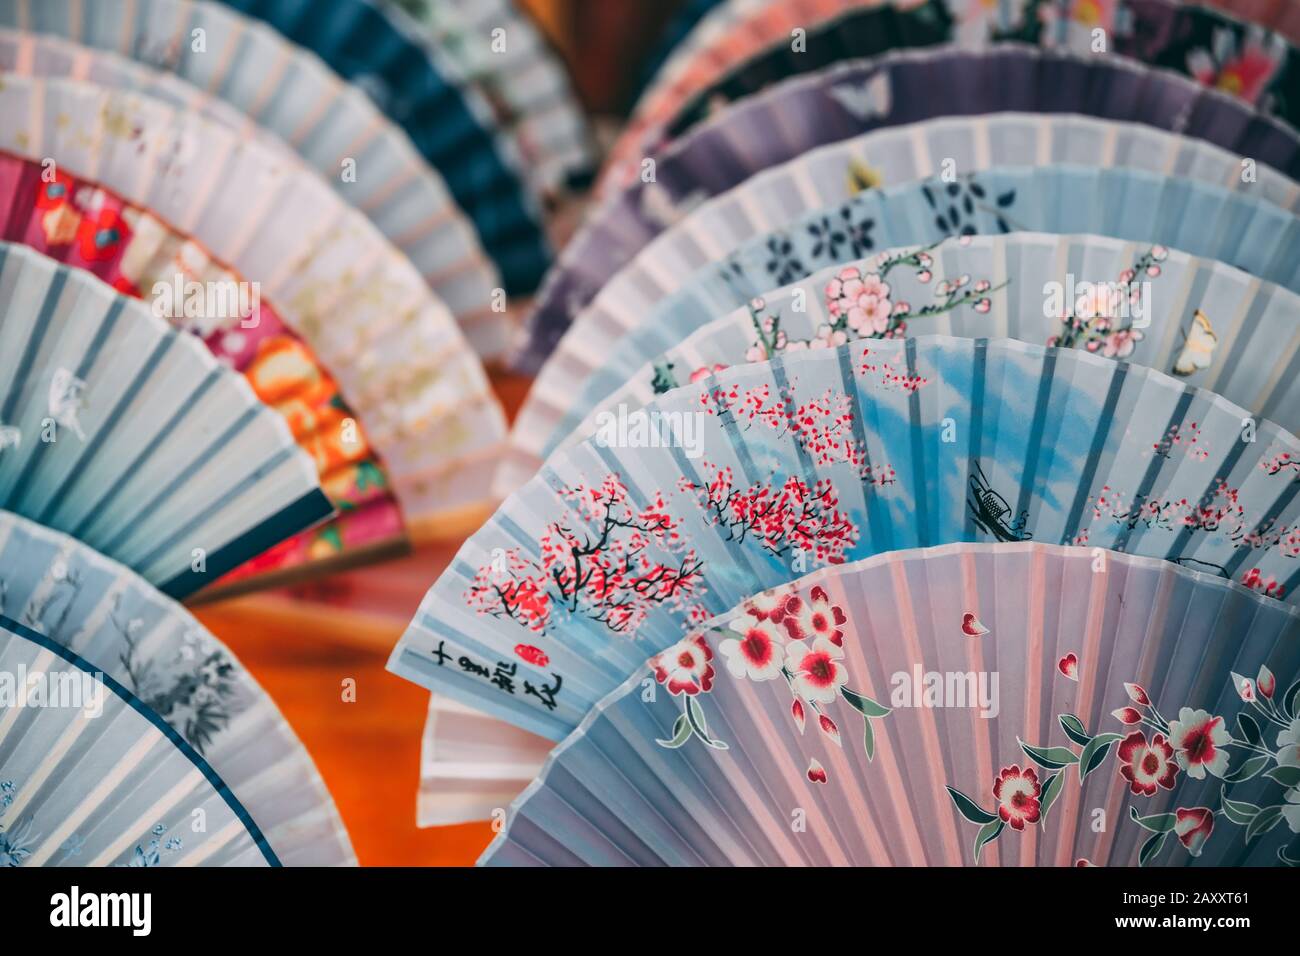 Colourful souvenir fans for sale on the street in the Muslim Quarter, Xian town, China Stock Photo